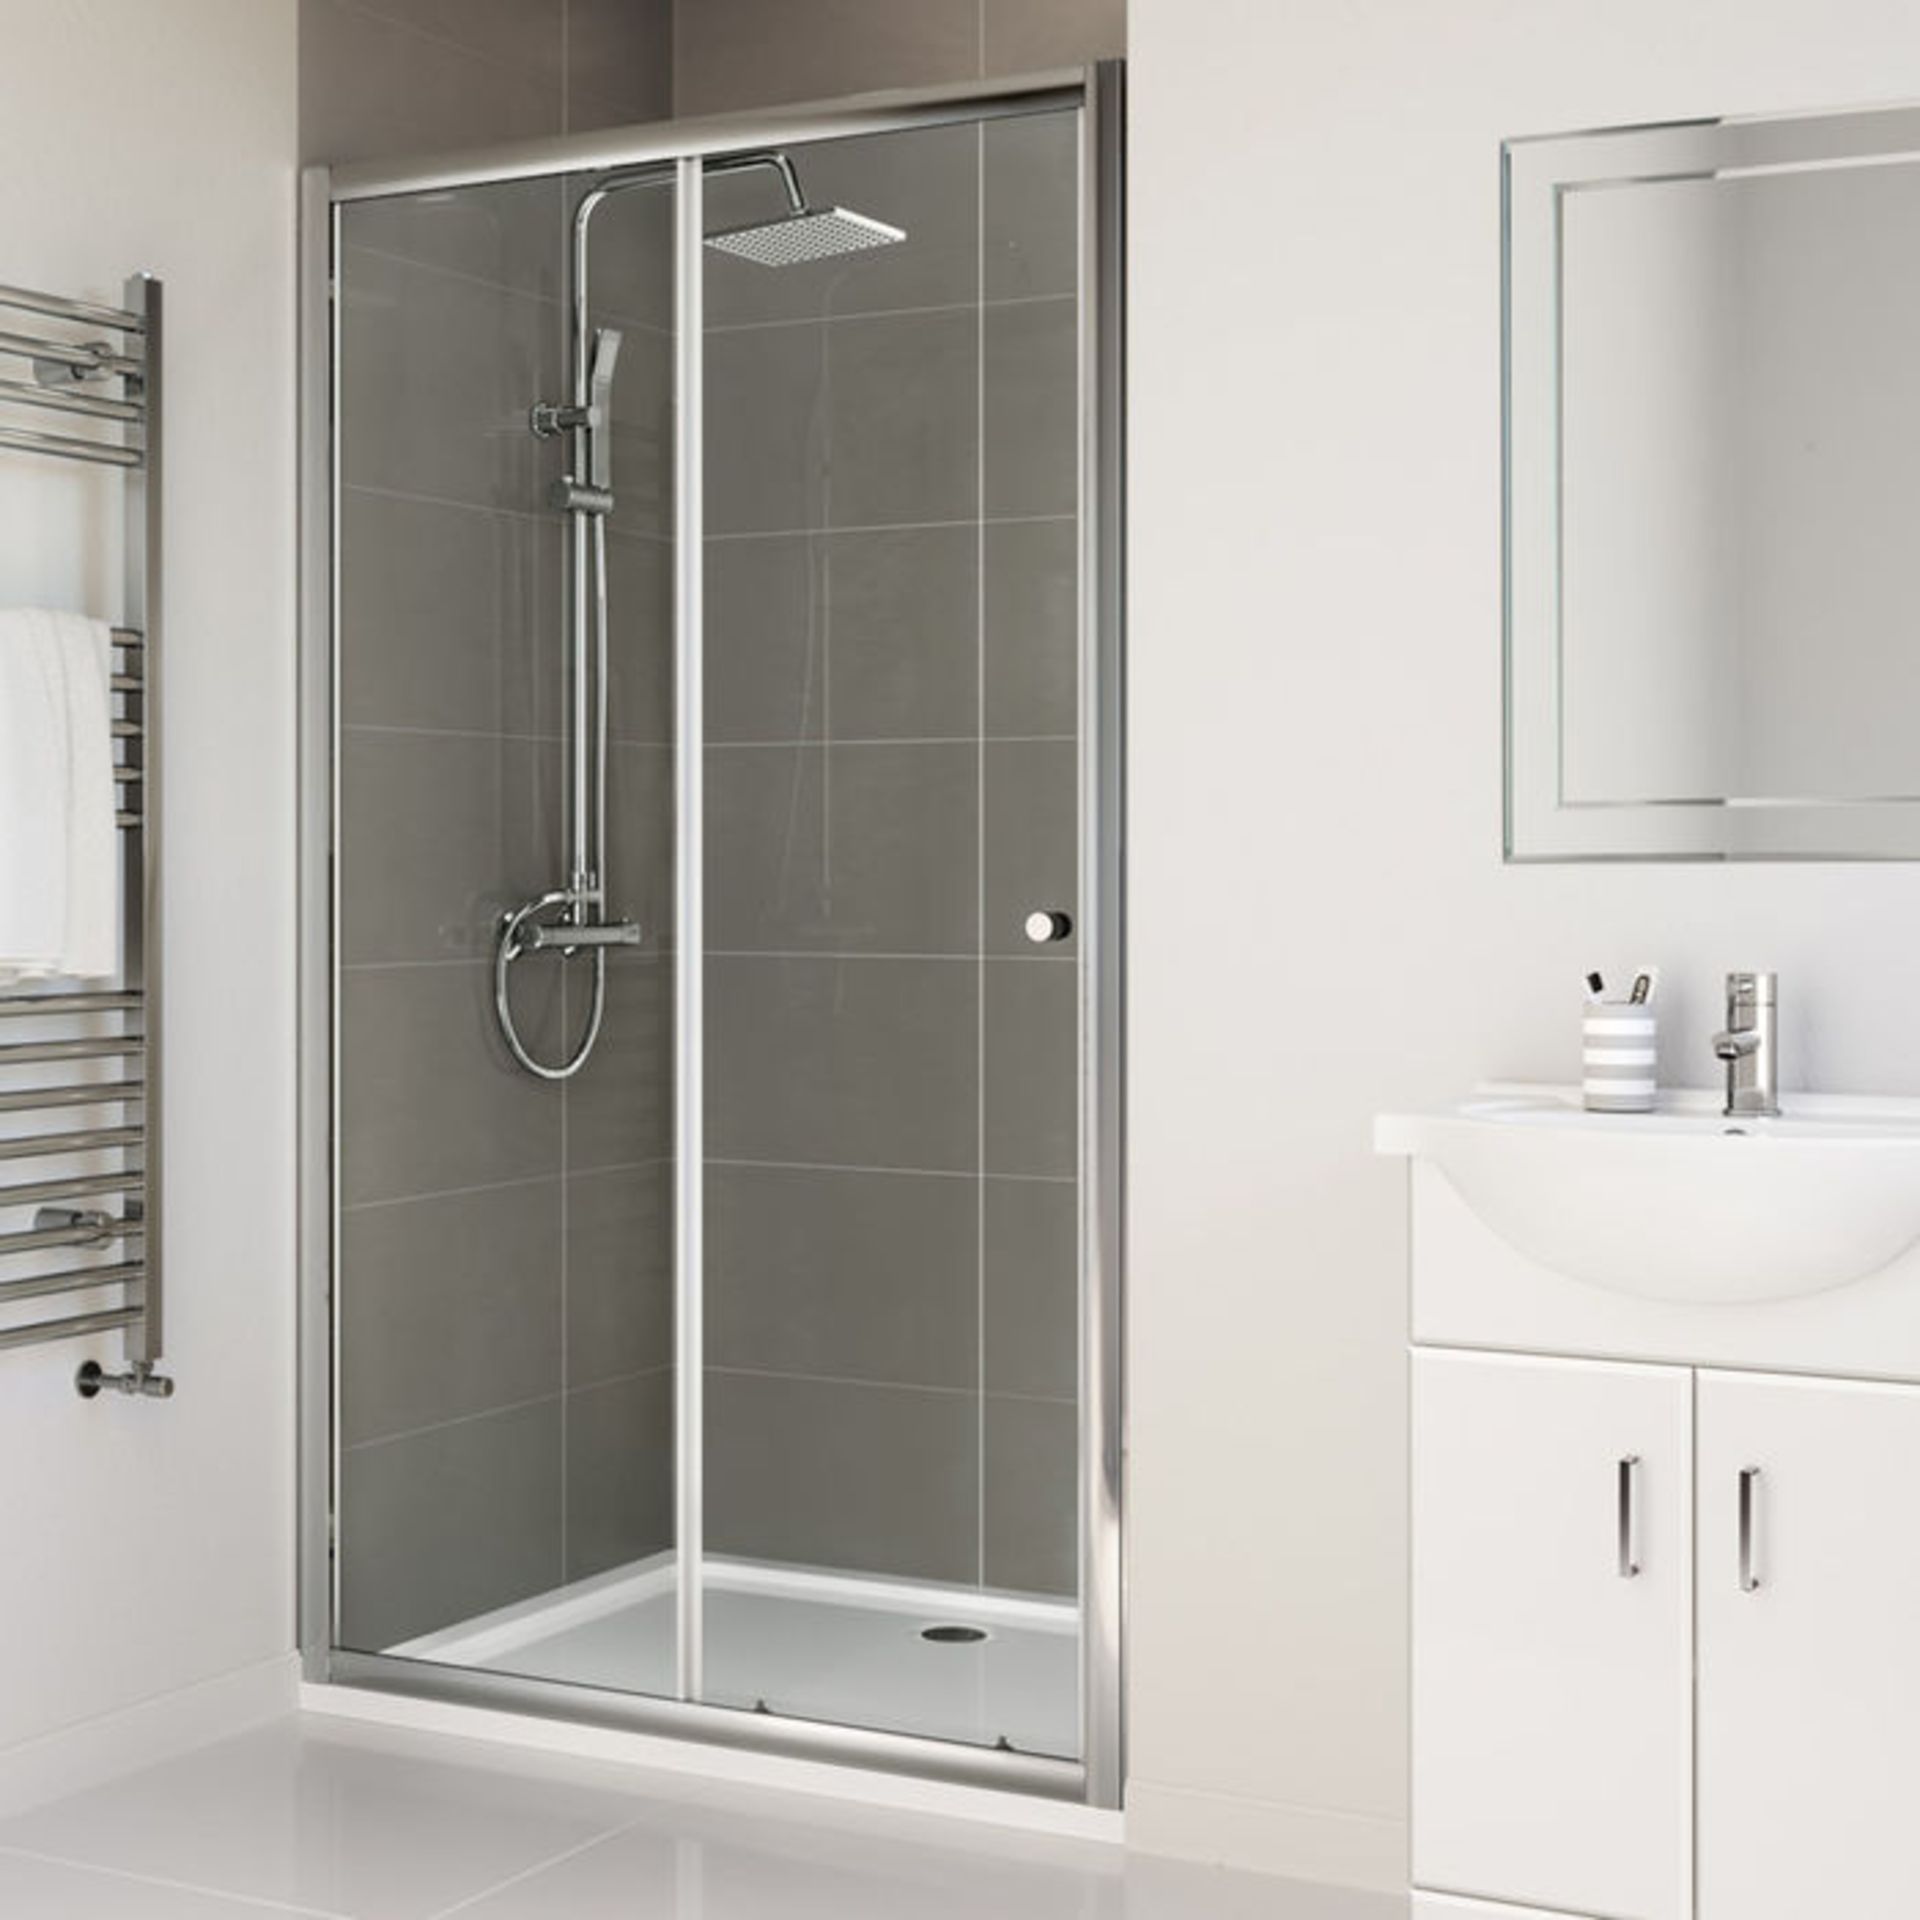 (TS101) 1200mm - Elements Sliding Shower Door. RRP £299.99. 4mm Safety Glass Fully waterproof tested